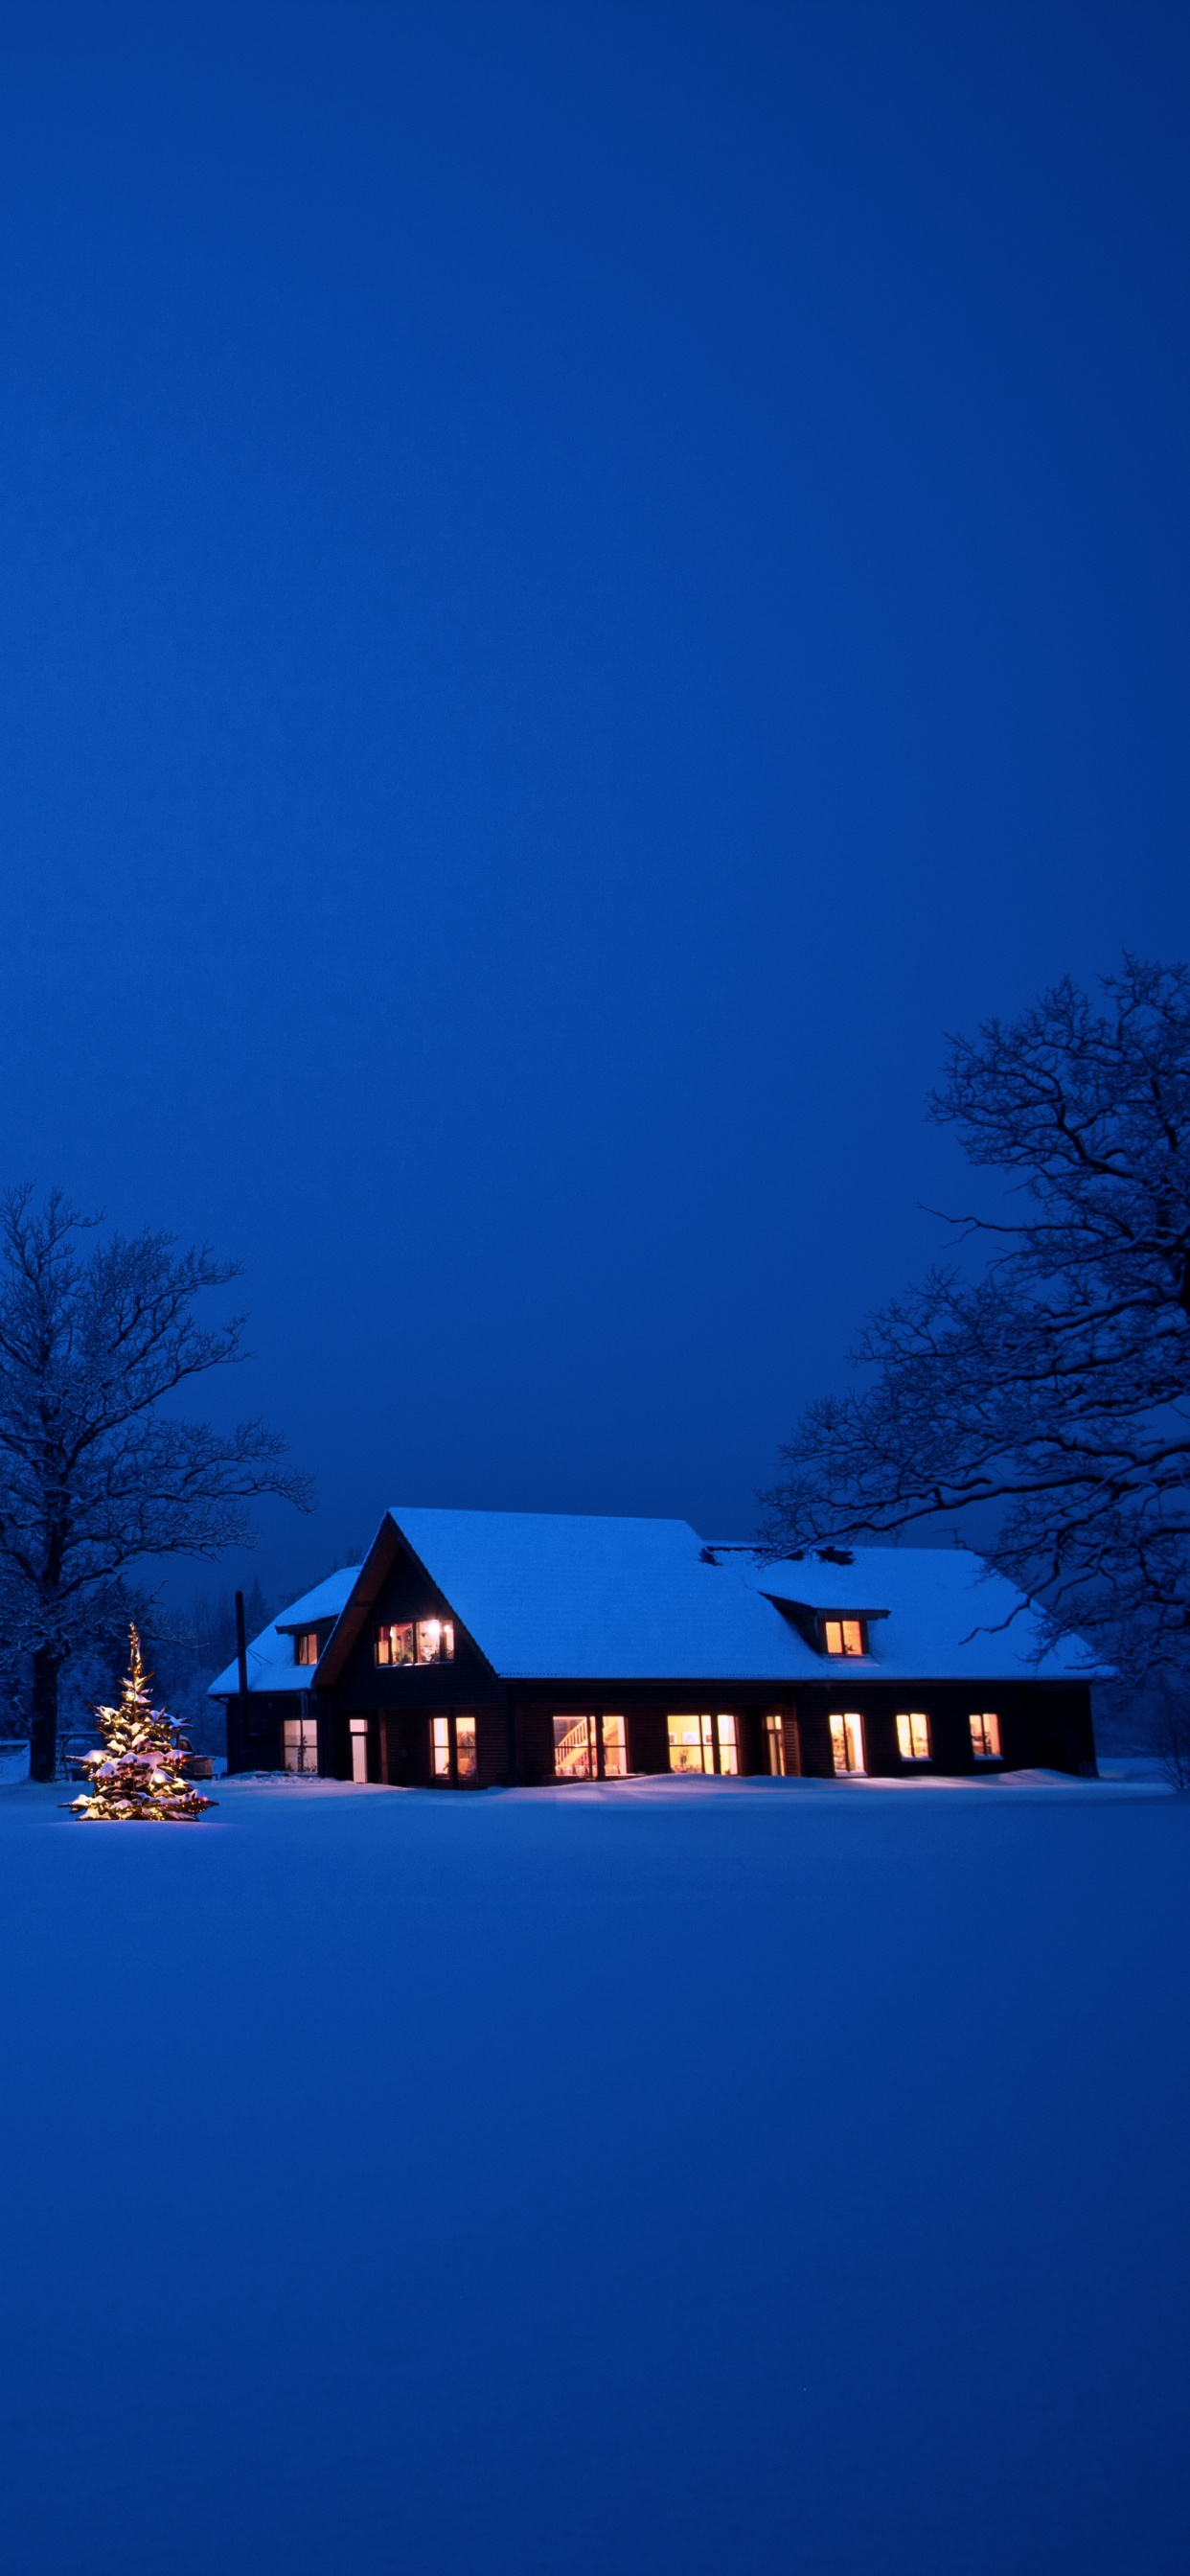 Brown Wooden House on Snow Covered Ground During Night Time. Wallpaper in 1242x2688 Resolution